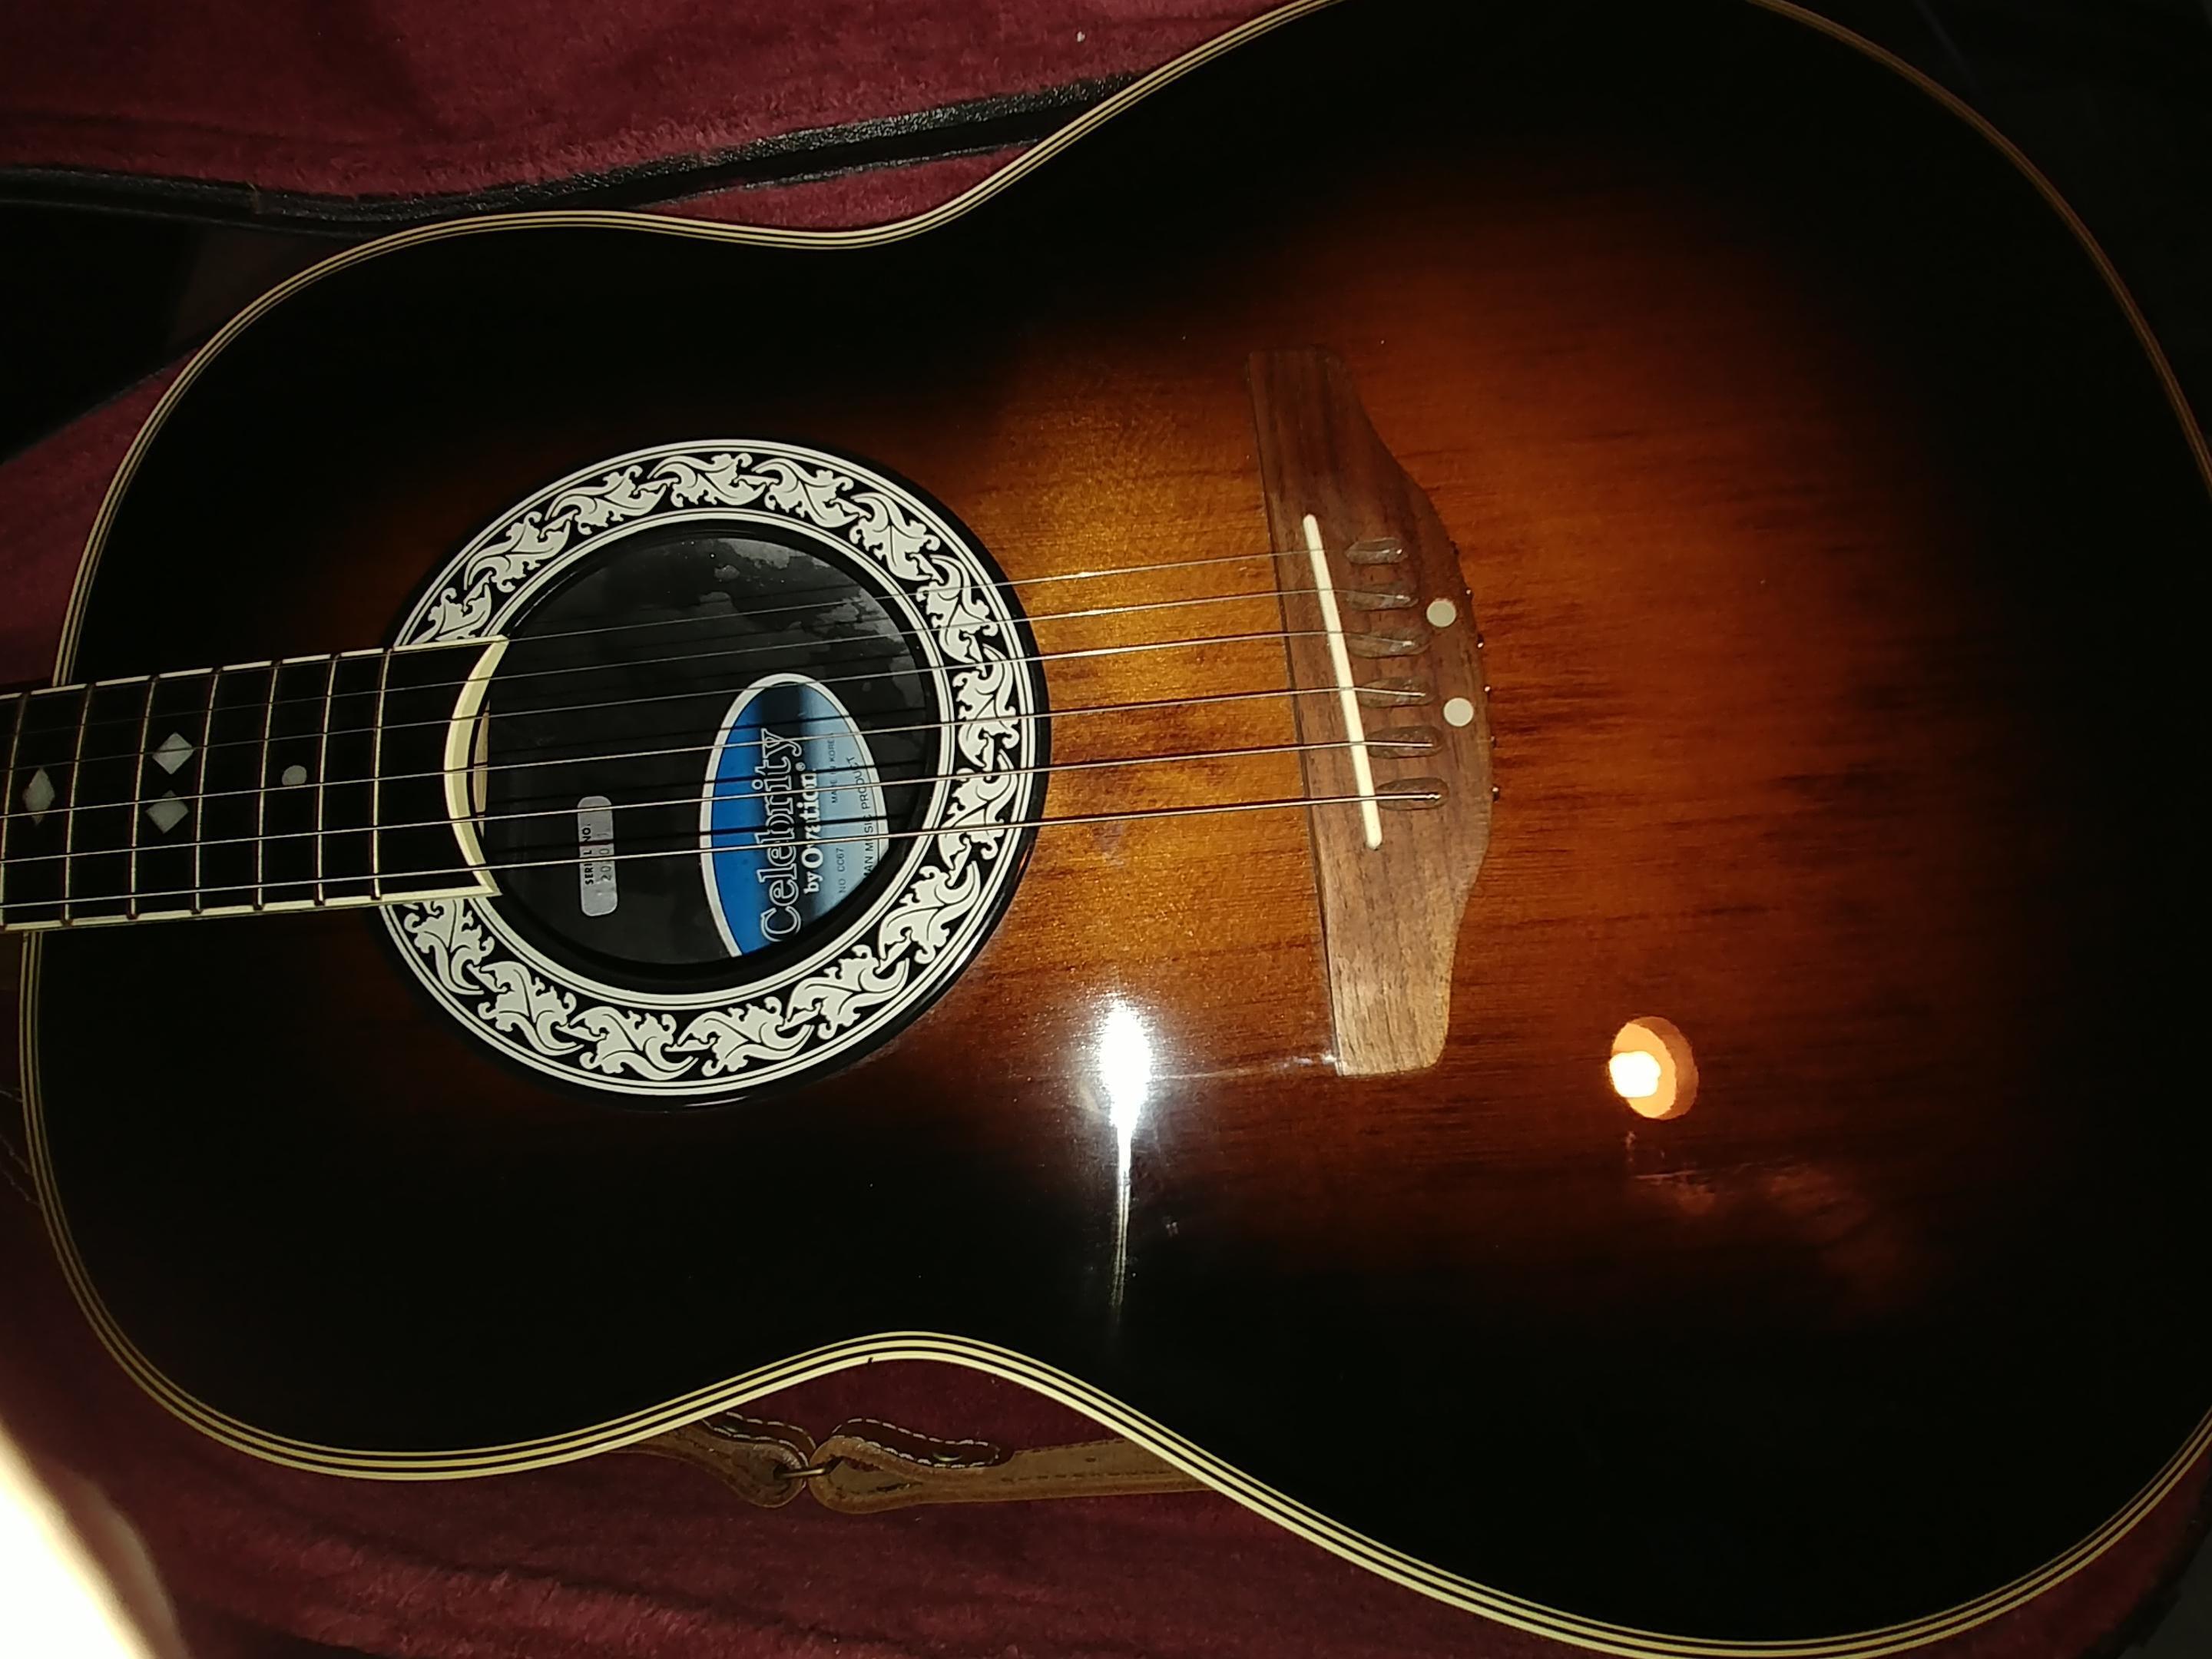 Used Ovation cc67 Celebrity - Sweetwater's Gear Exchange